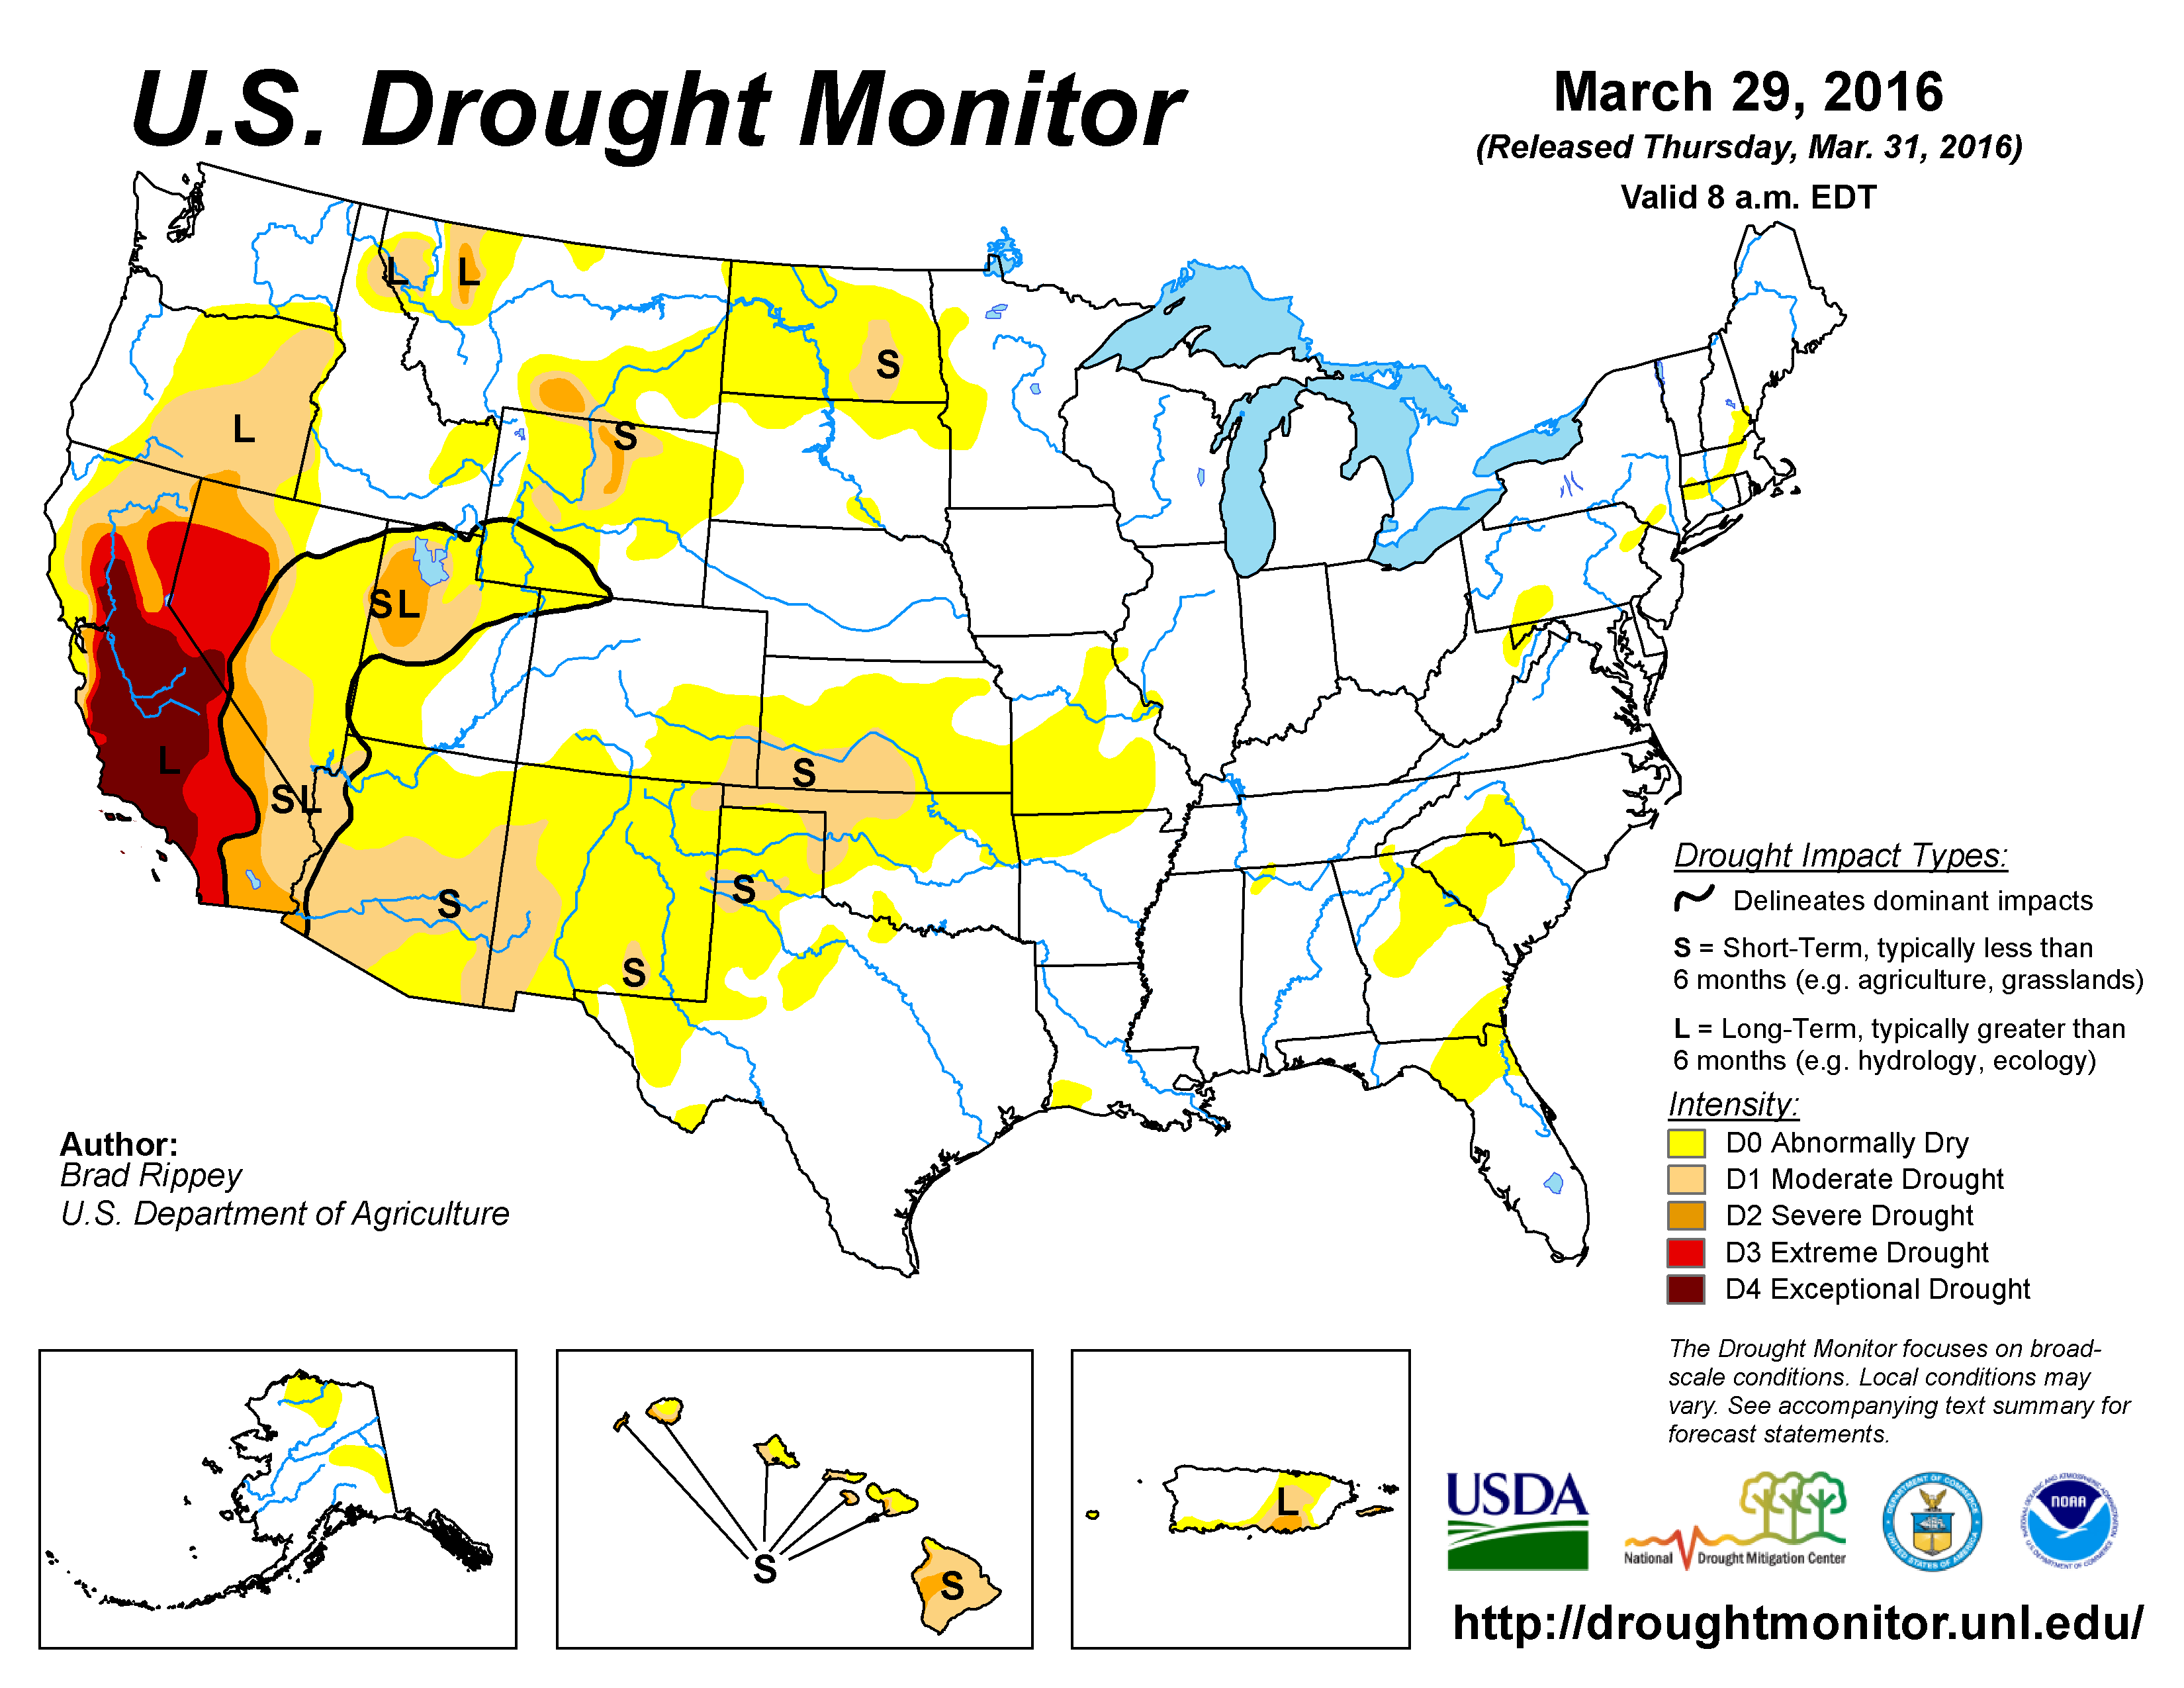 The U.S. Drought Monitor drought map valid March 29, 2016